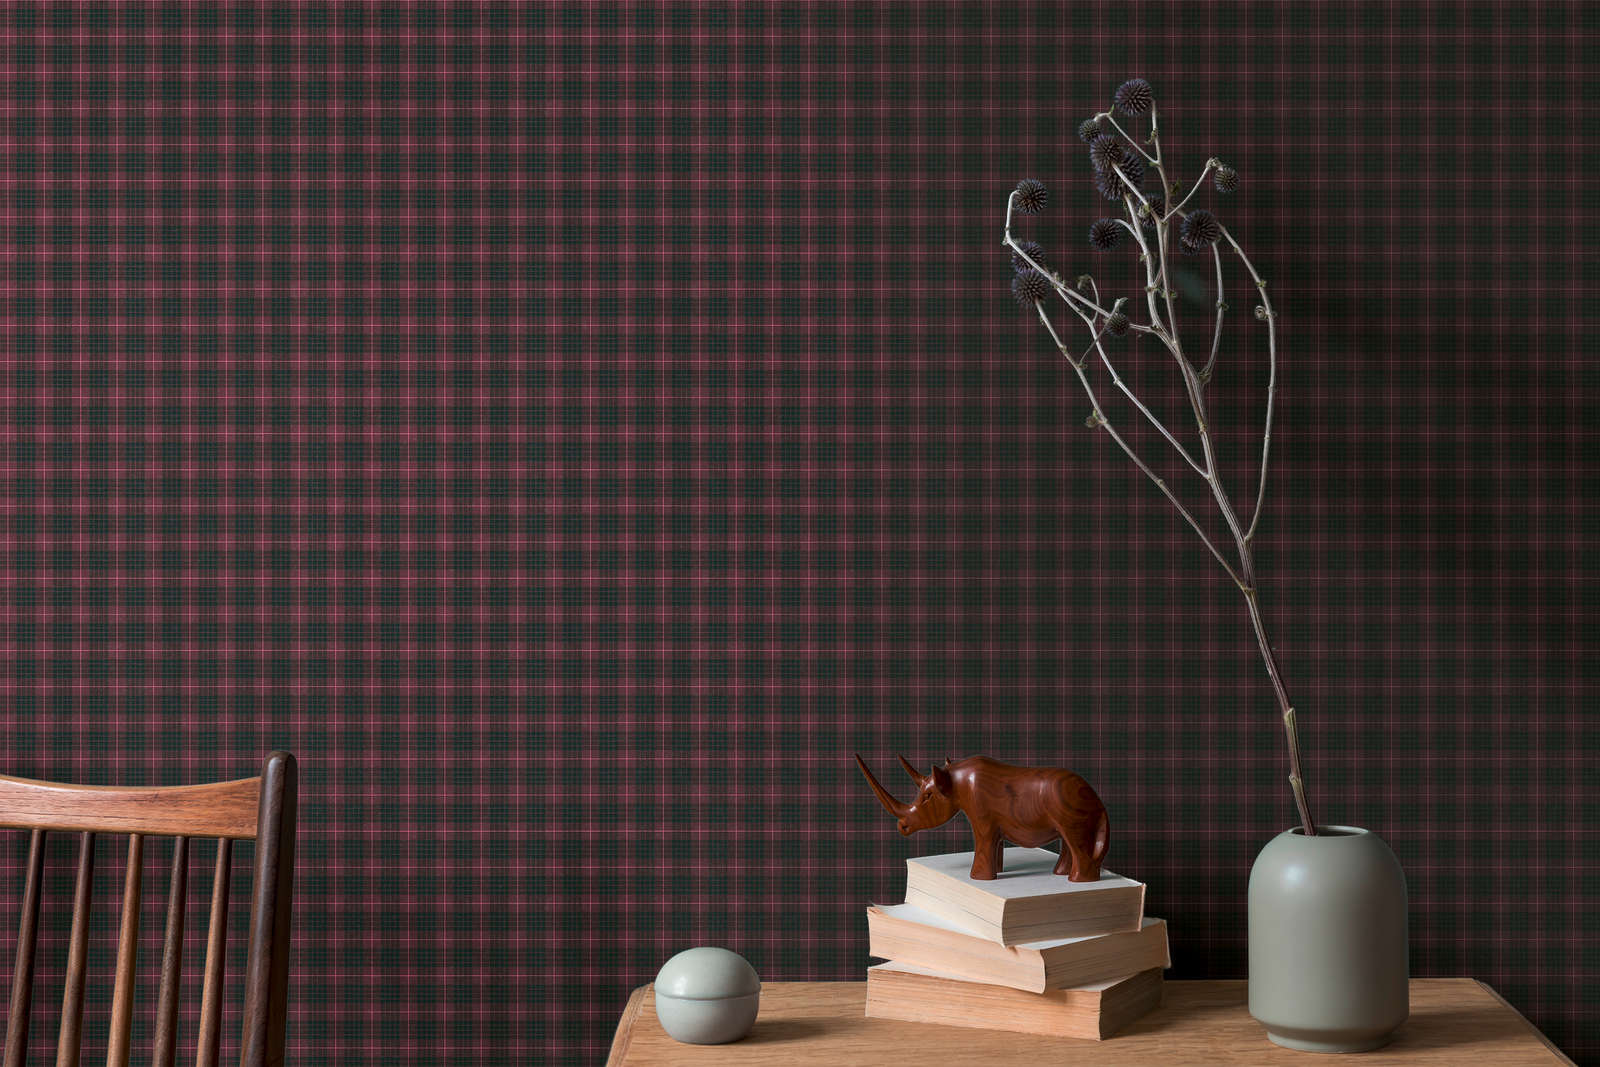             Non-woven wallpaper with fabric look chequered flannel look - red, black
        